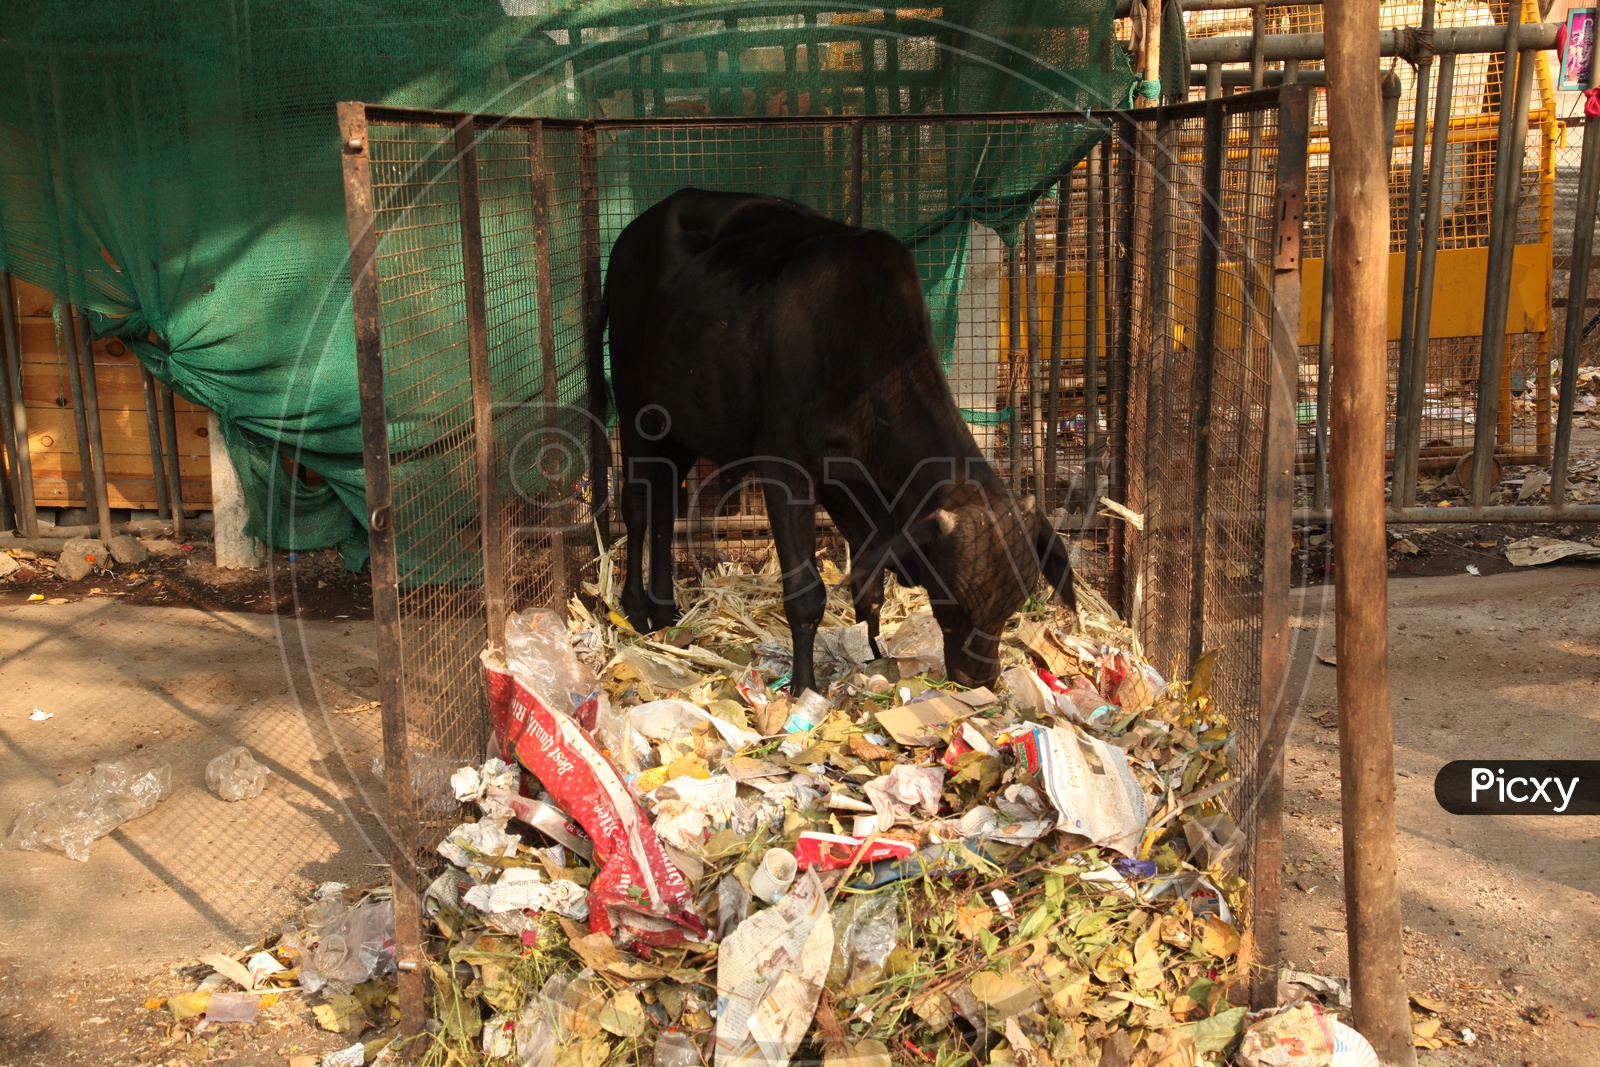 Indian Cow Eating Garbage Waste In a Urban City